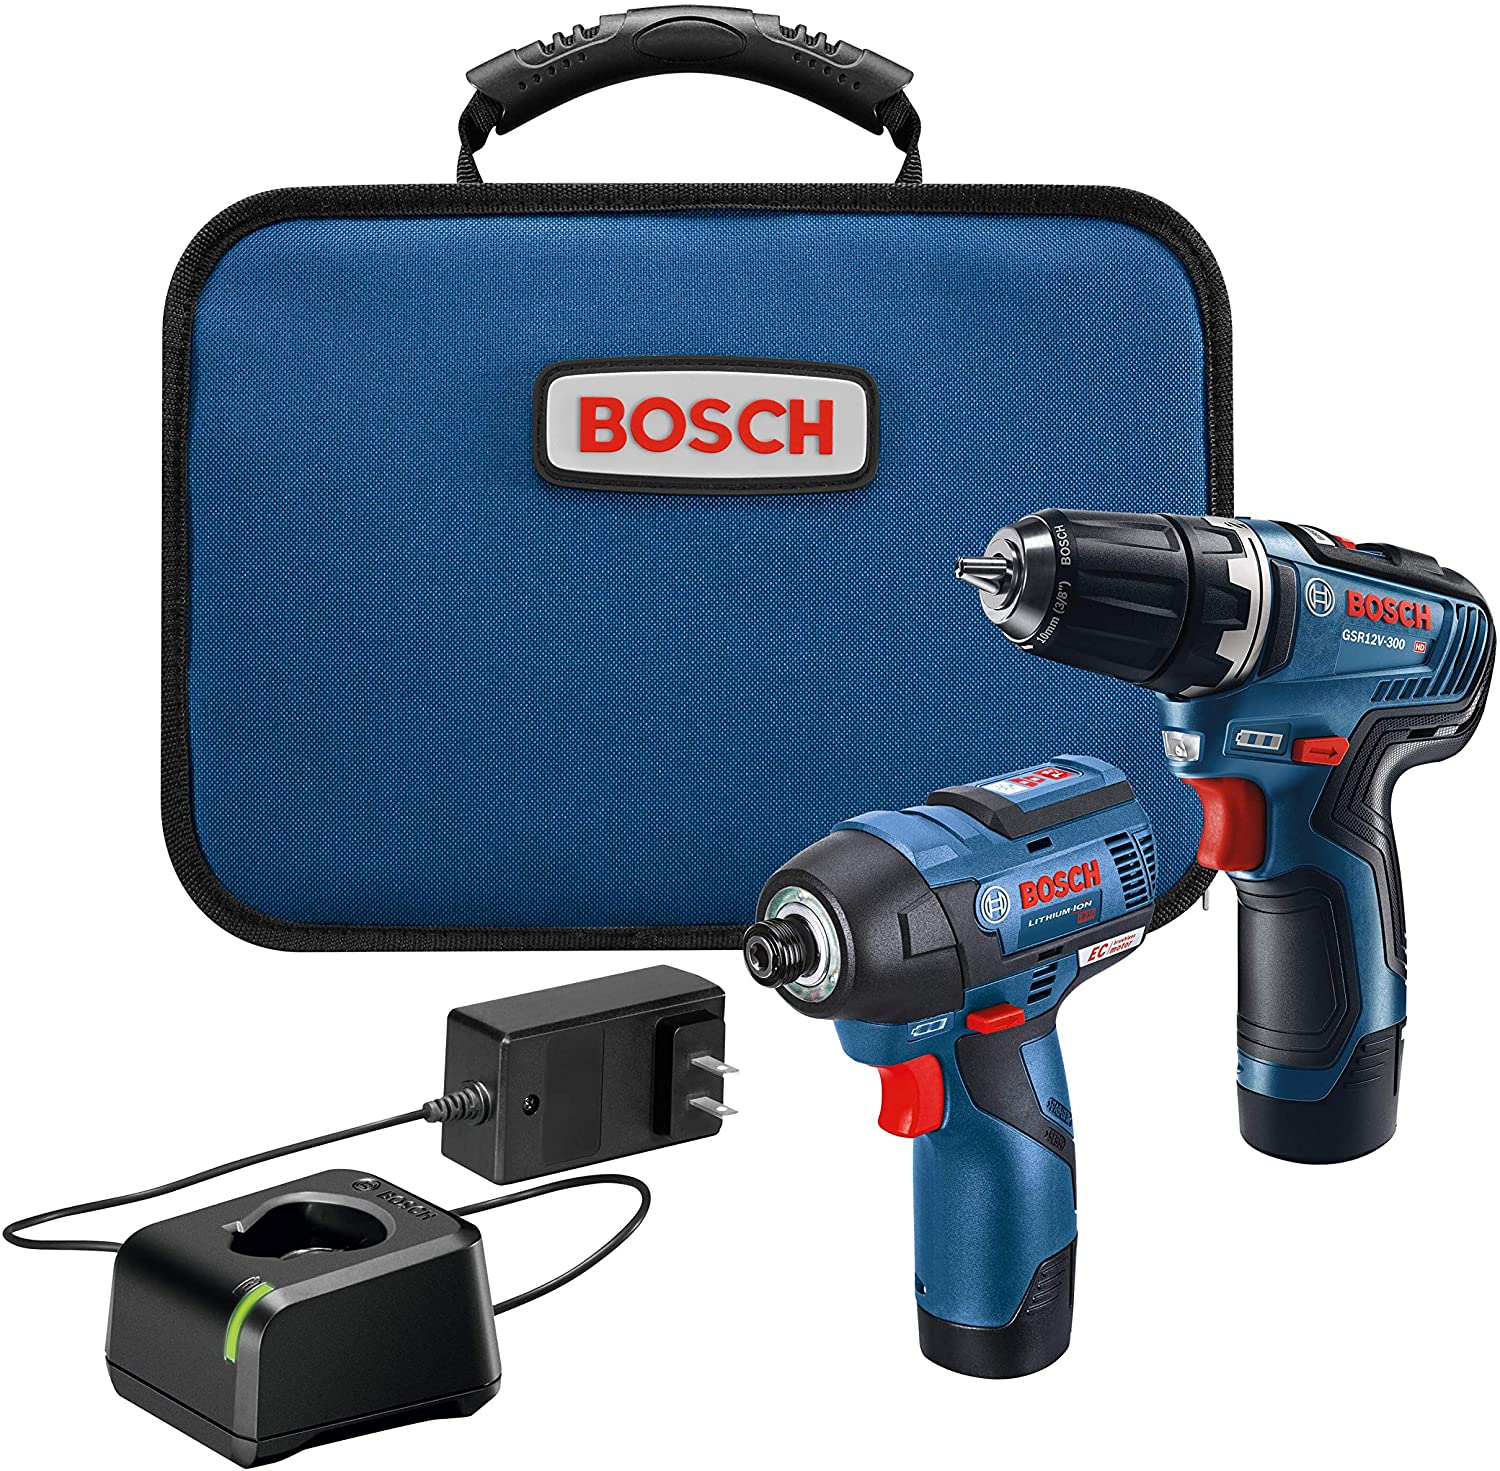 BOSCH GXL12V-220B22 12V Max 2-Tool Brushless Combo Kit with 3/8 In. Drill/Driver, 1/4 In. Hex Impact Driver and (2) 2.0 Ah Batteries Amazon $149